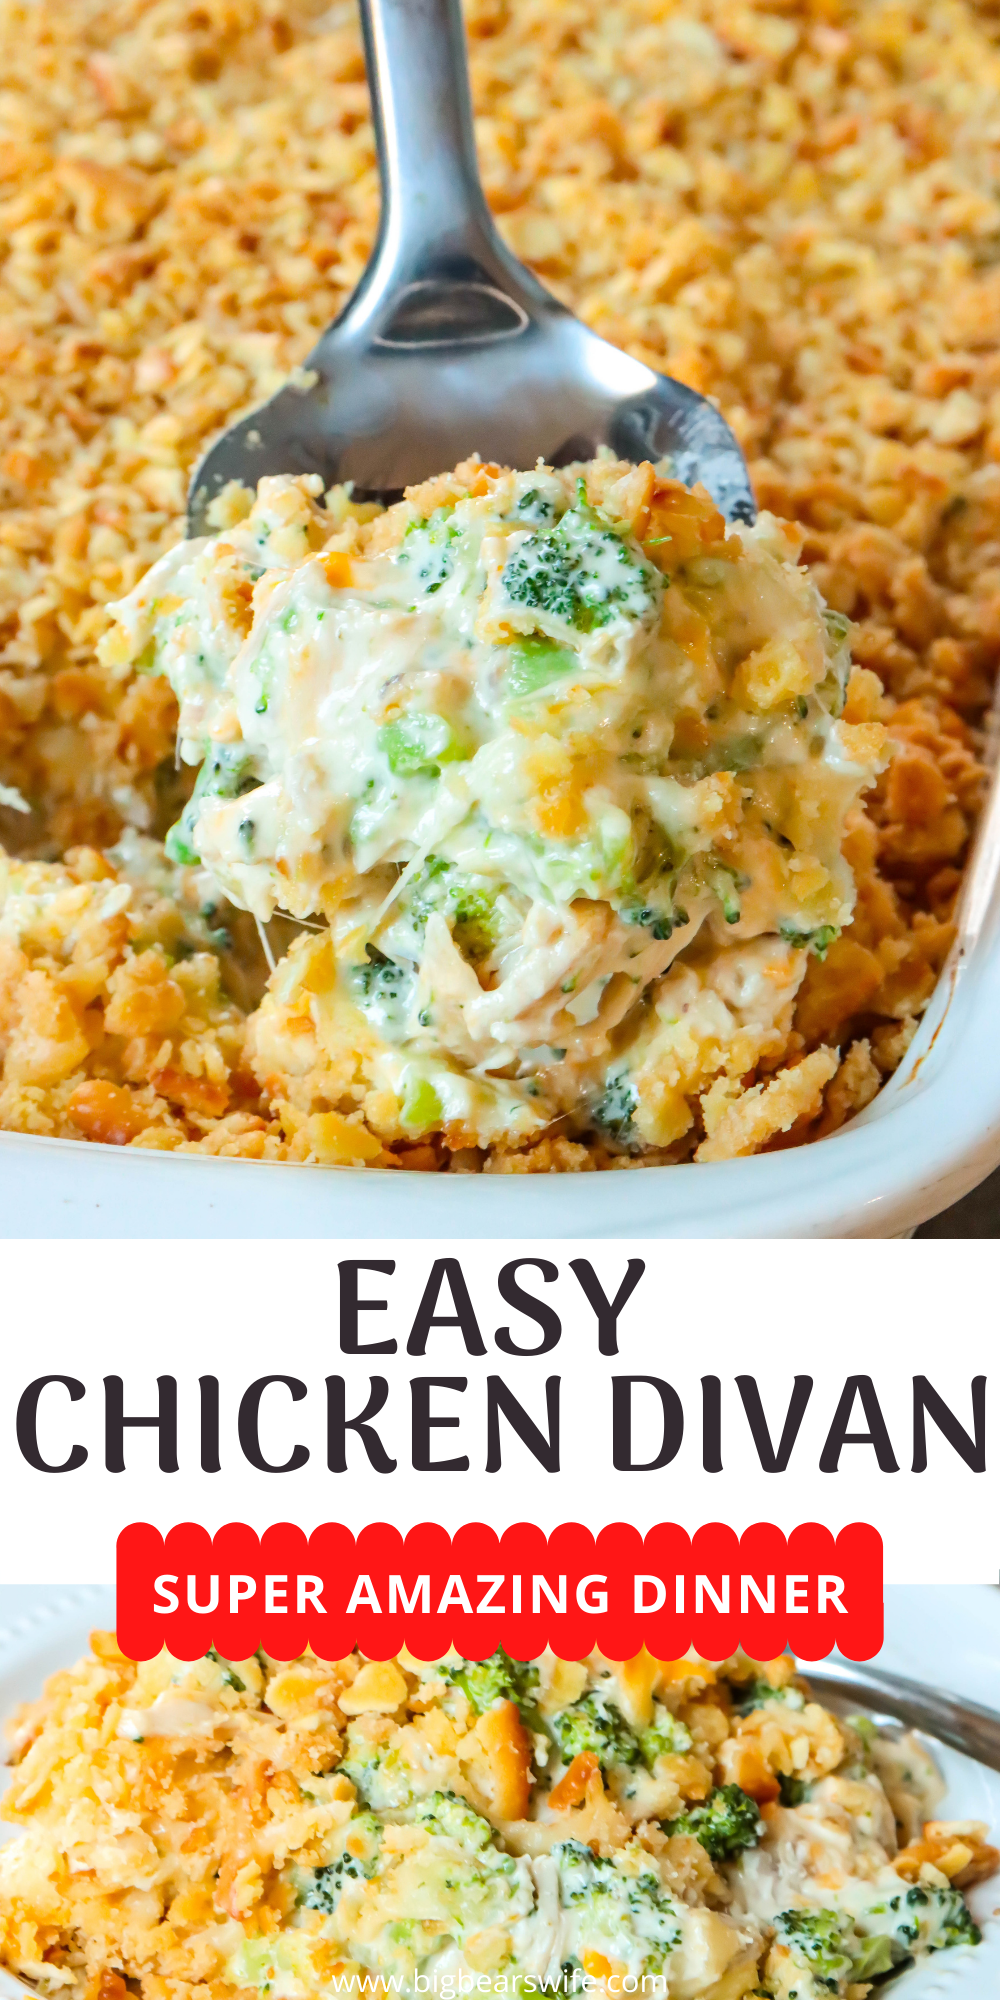 This Easy Chicken Divan Recipe is a delicious and creamy casserole that you're going to fall in love with! Broccoli, chicken and a creamy sauce are mixed together in this casserole with 2 types of cheese and topped with butter crackers!  via @bigbearswife